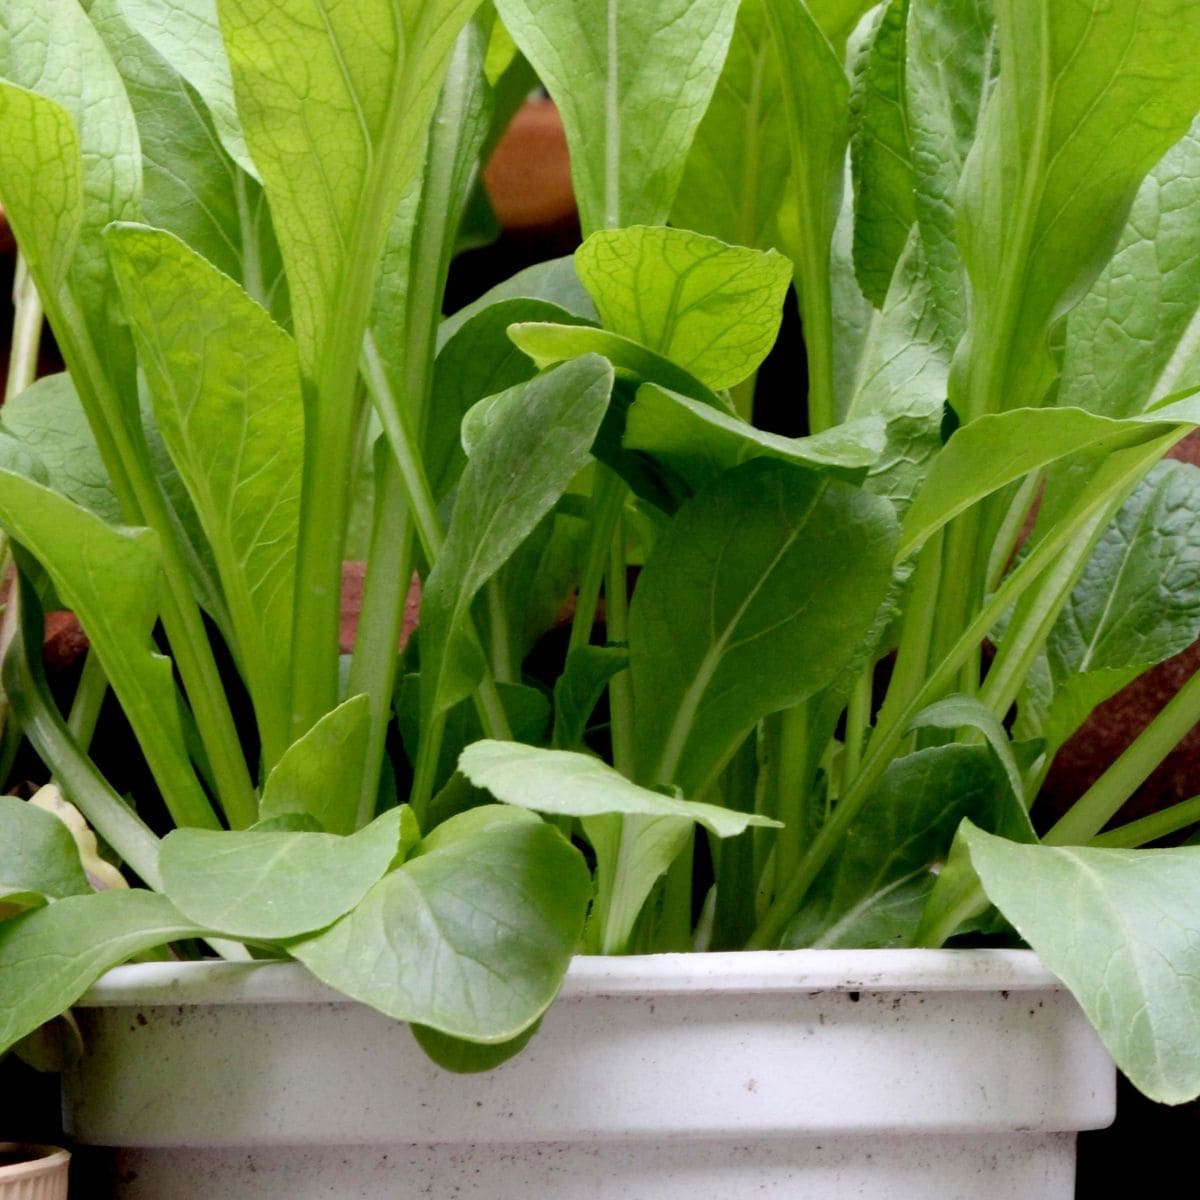 greens growing in a 5-gallon bucket.